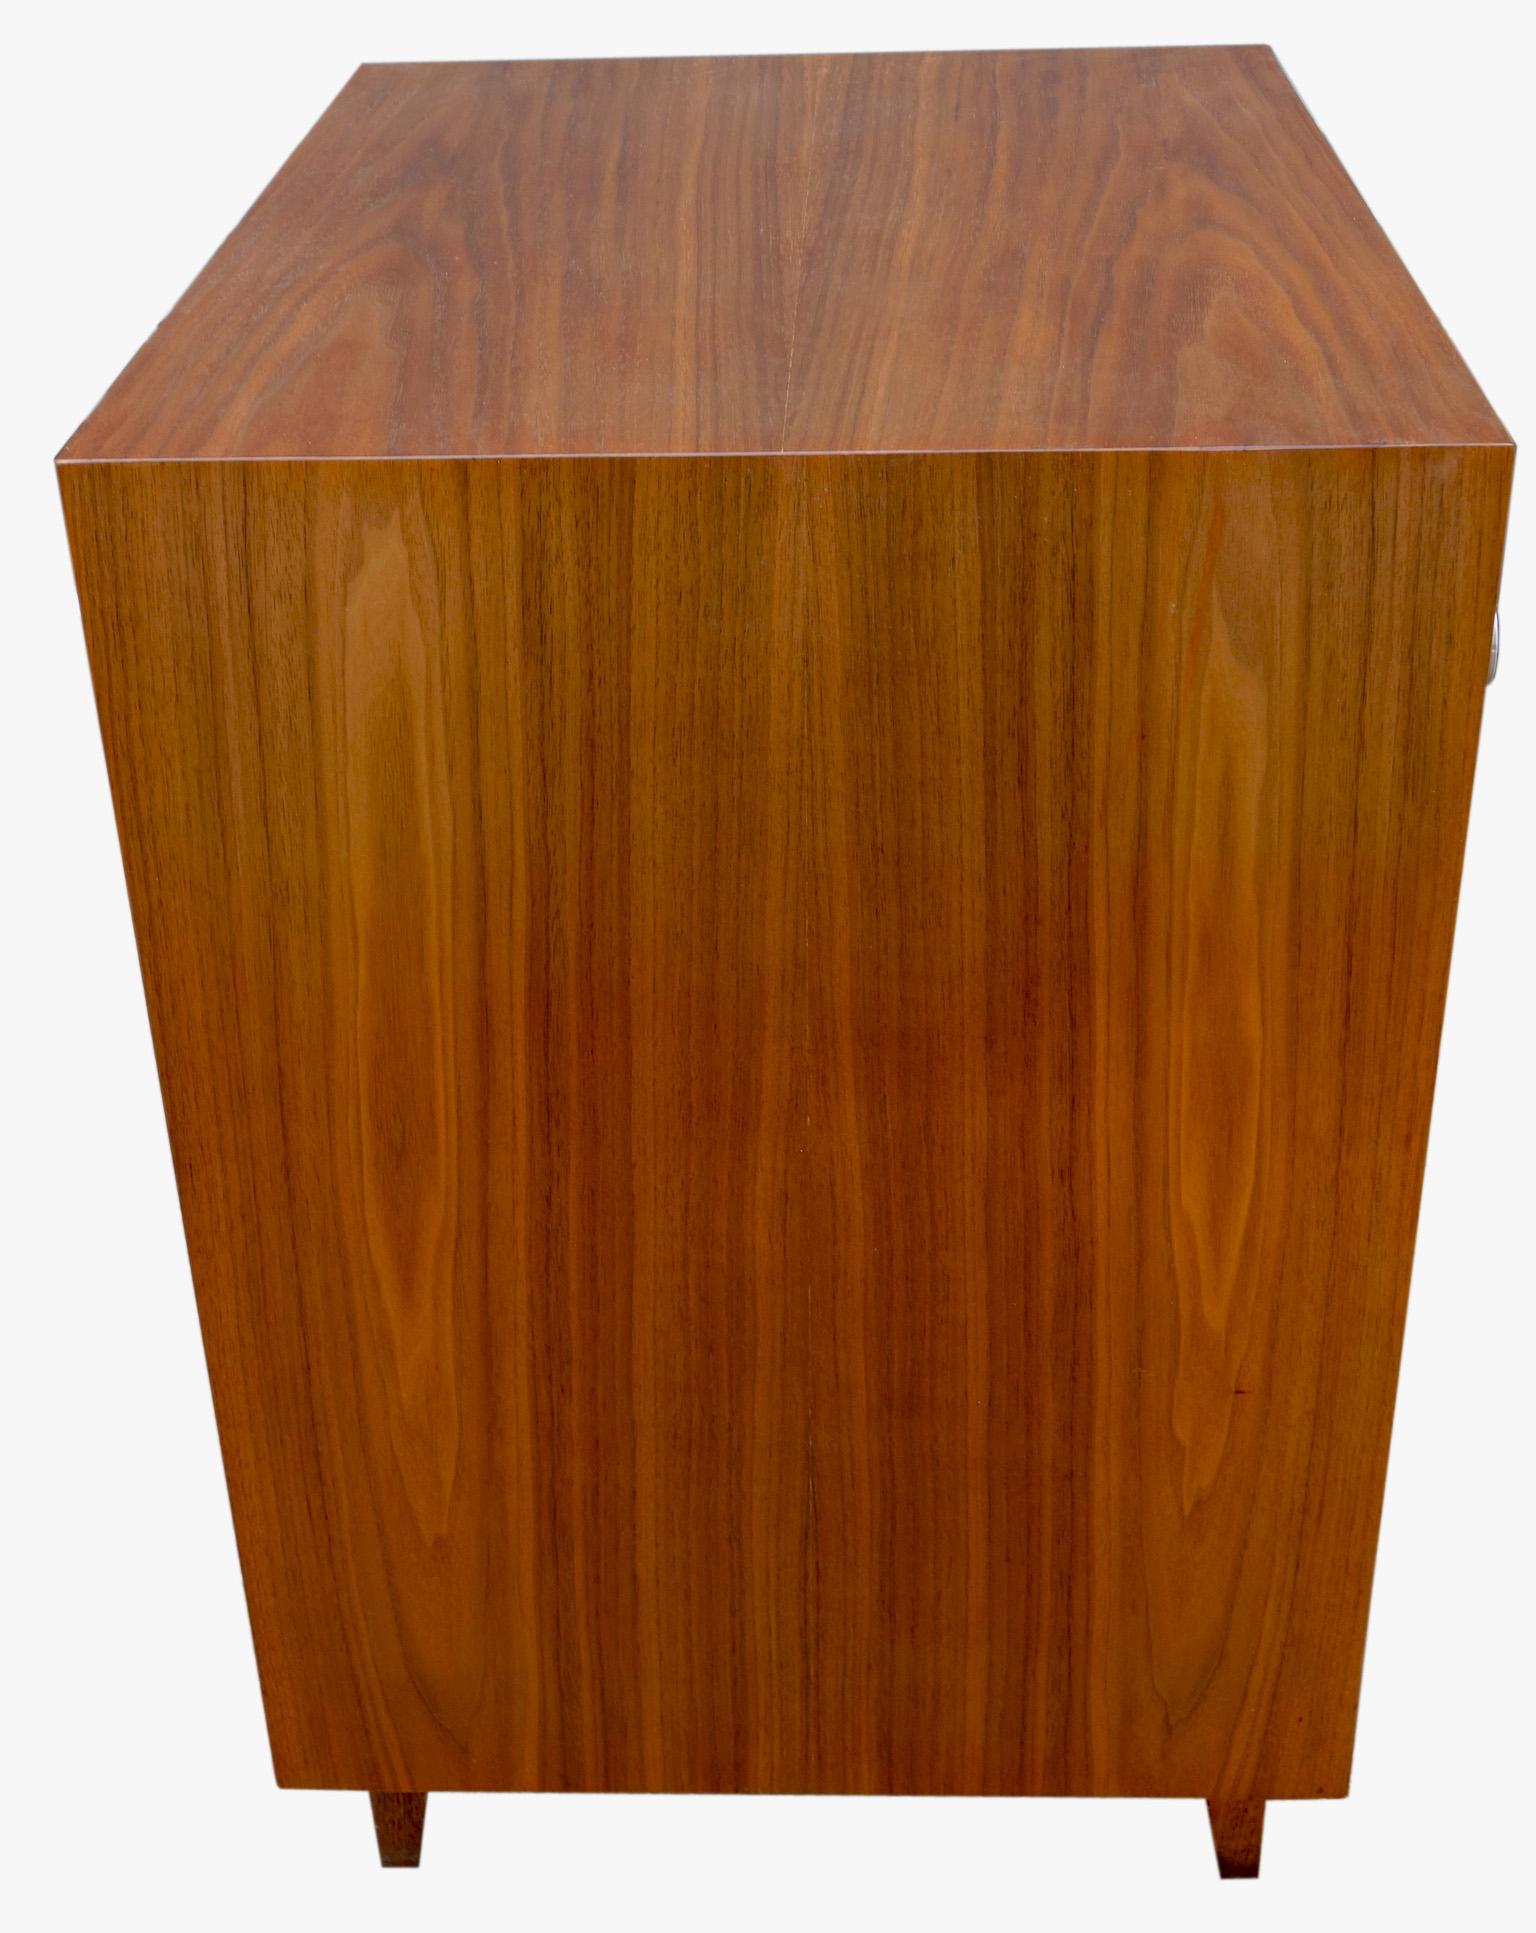 Walnut Midcentury Cabinet by George Nelson for Herman Miller